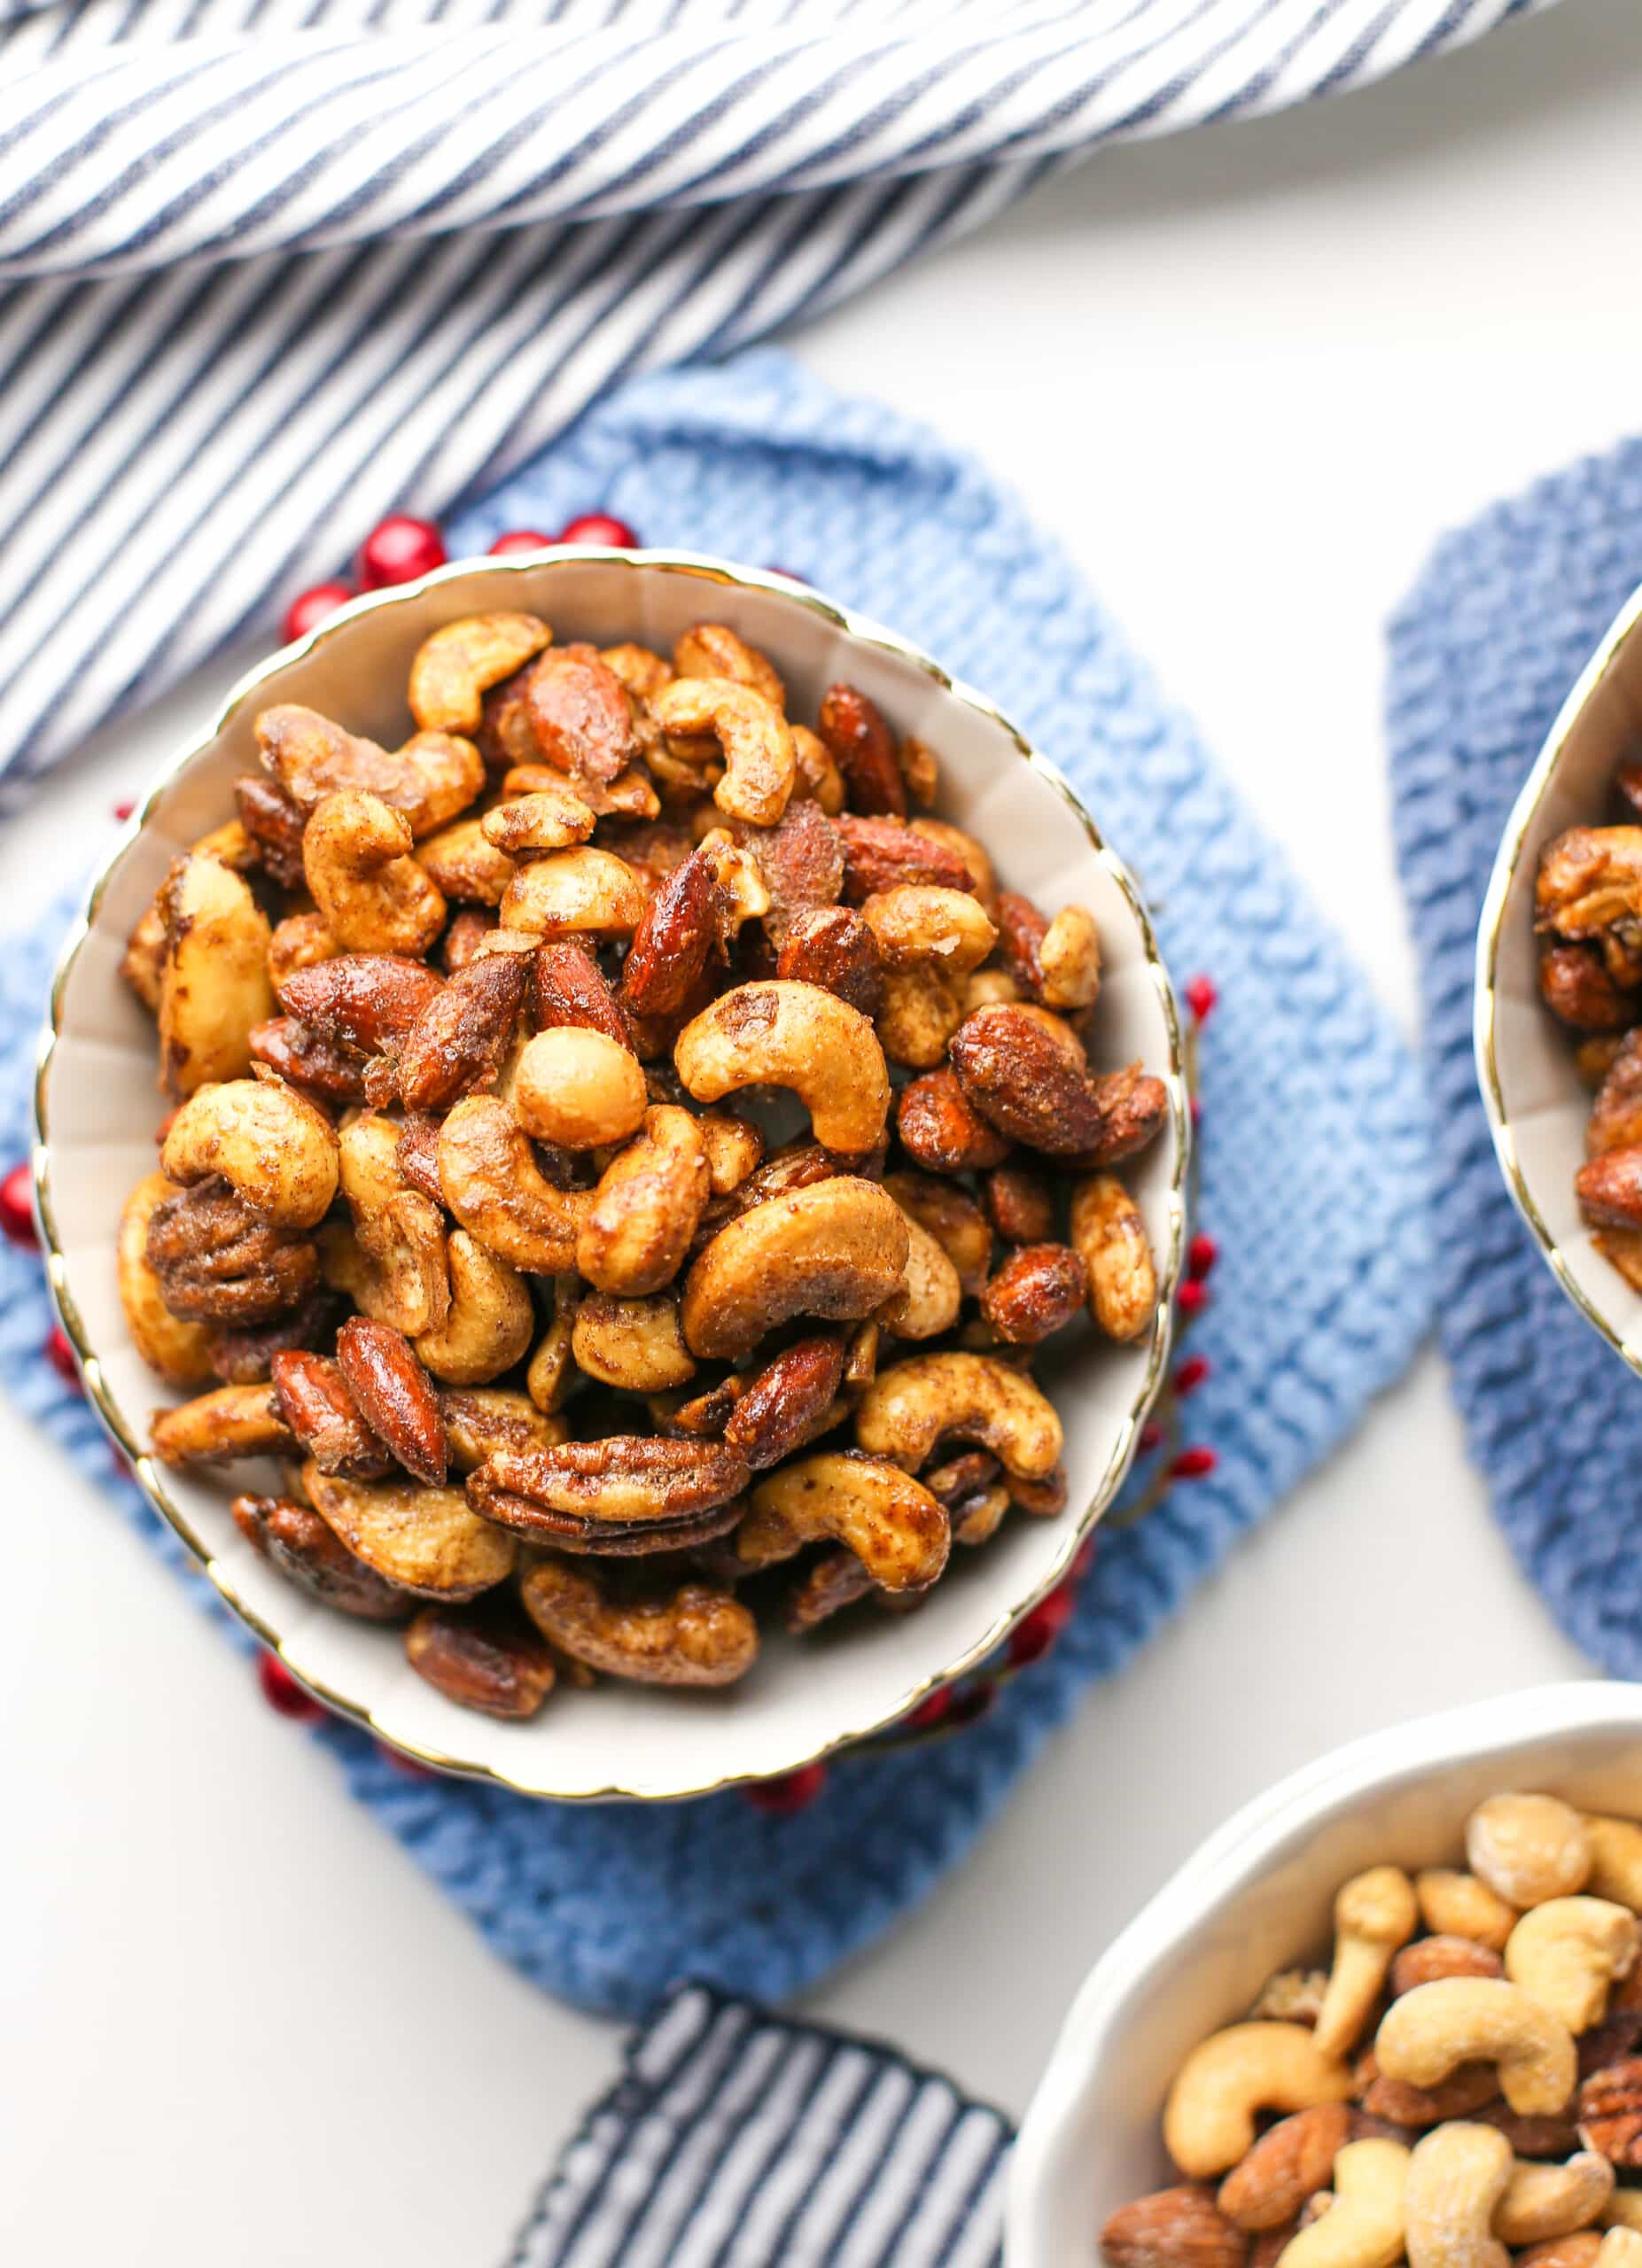 Overhead view of a bowl of cinnamon sugar mixed nuts.